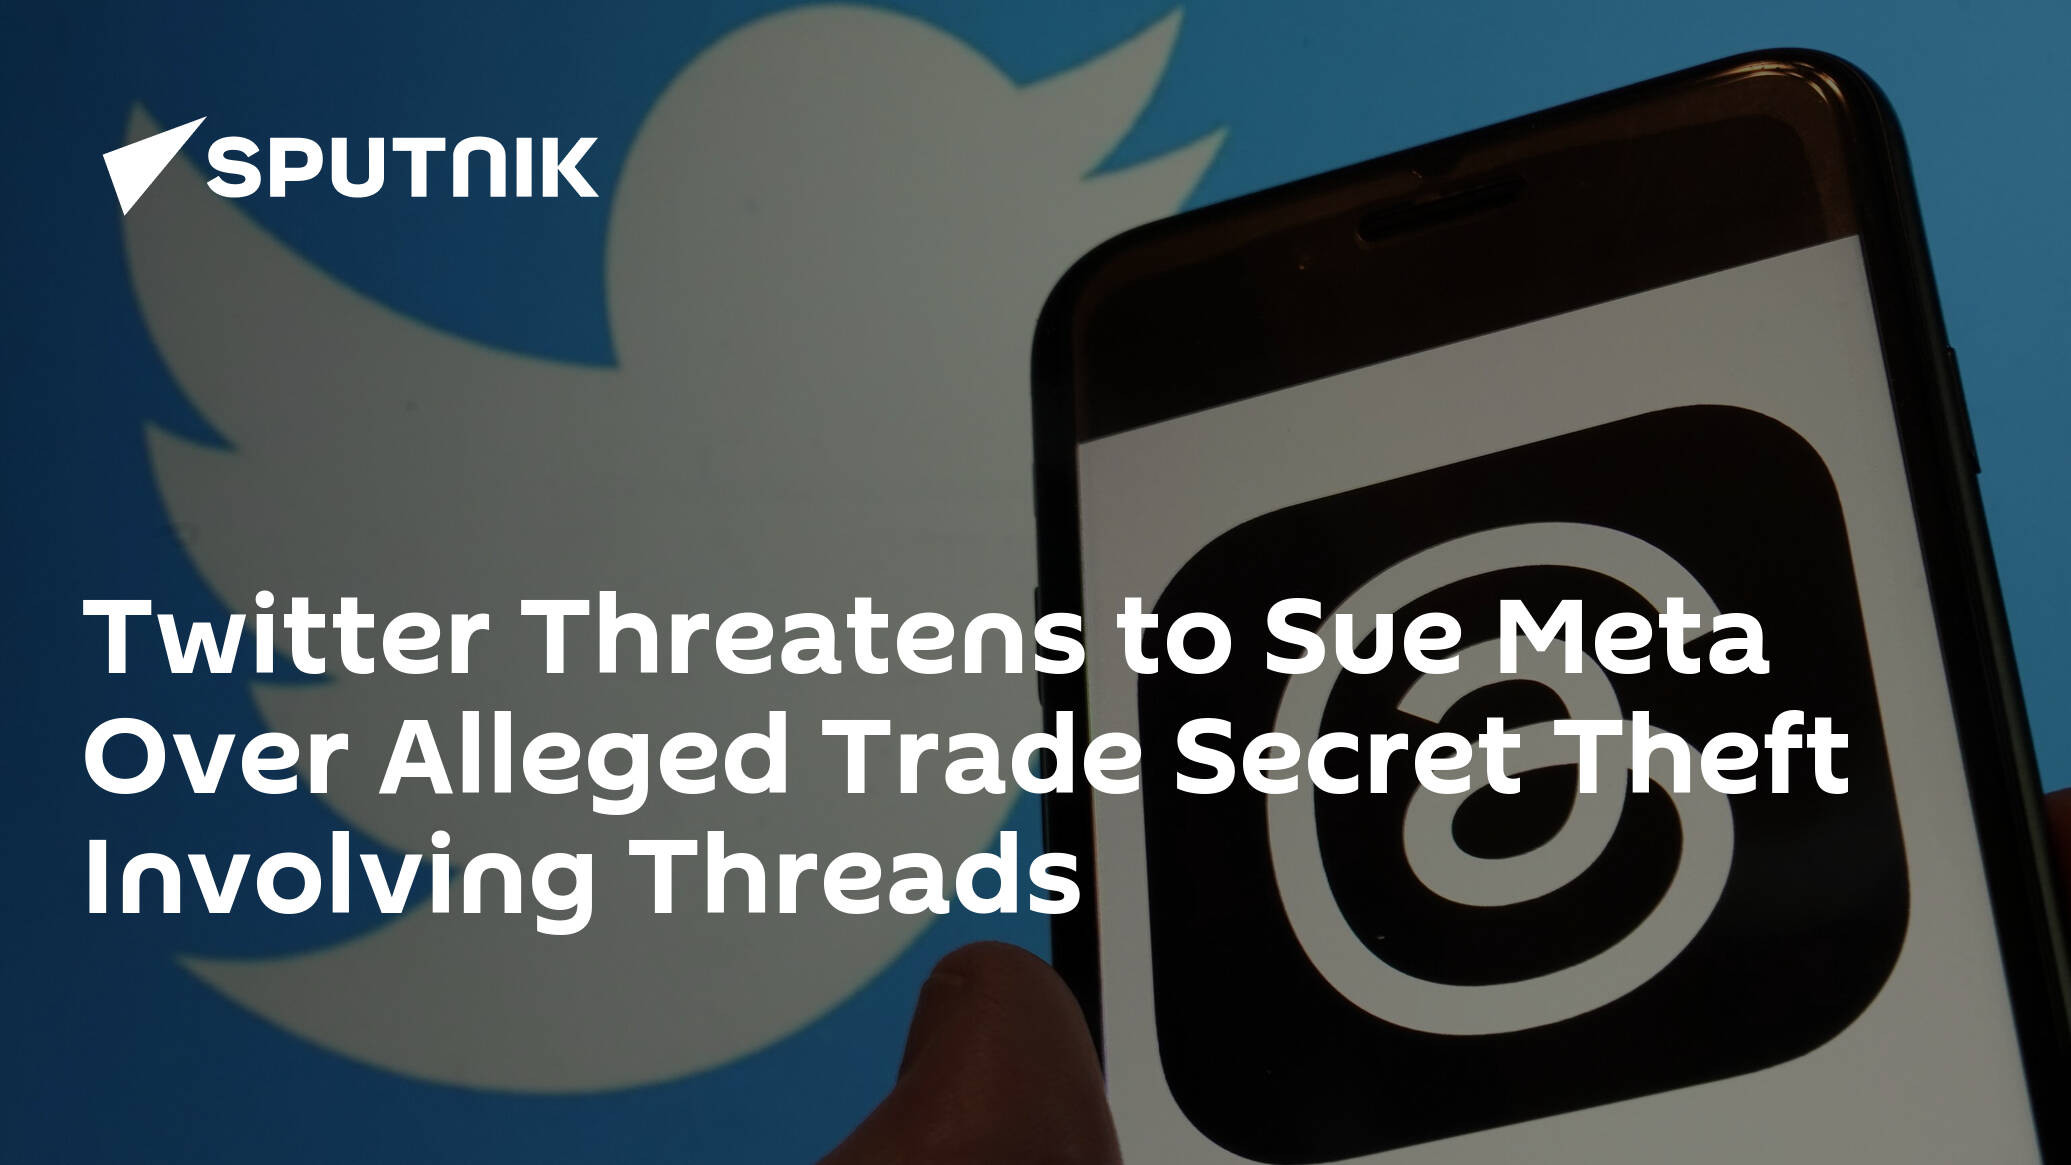 Twitter Reportedly Threatens to Sue Meta Over Alleged Trade Secret Theft Involving Threads